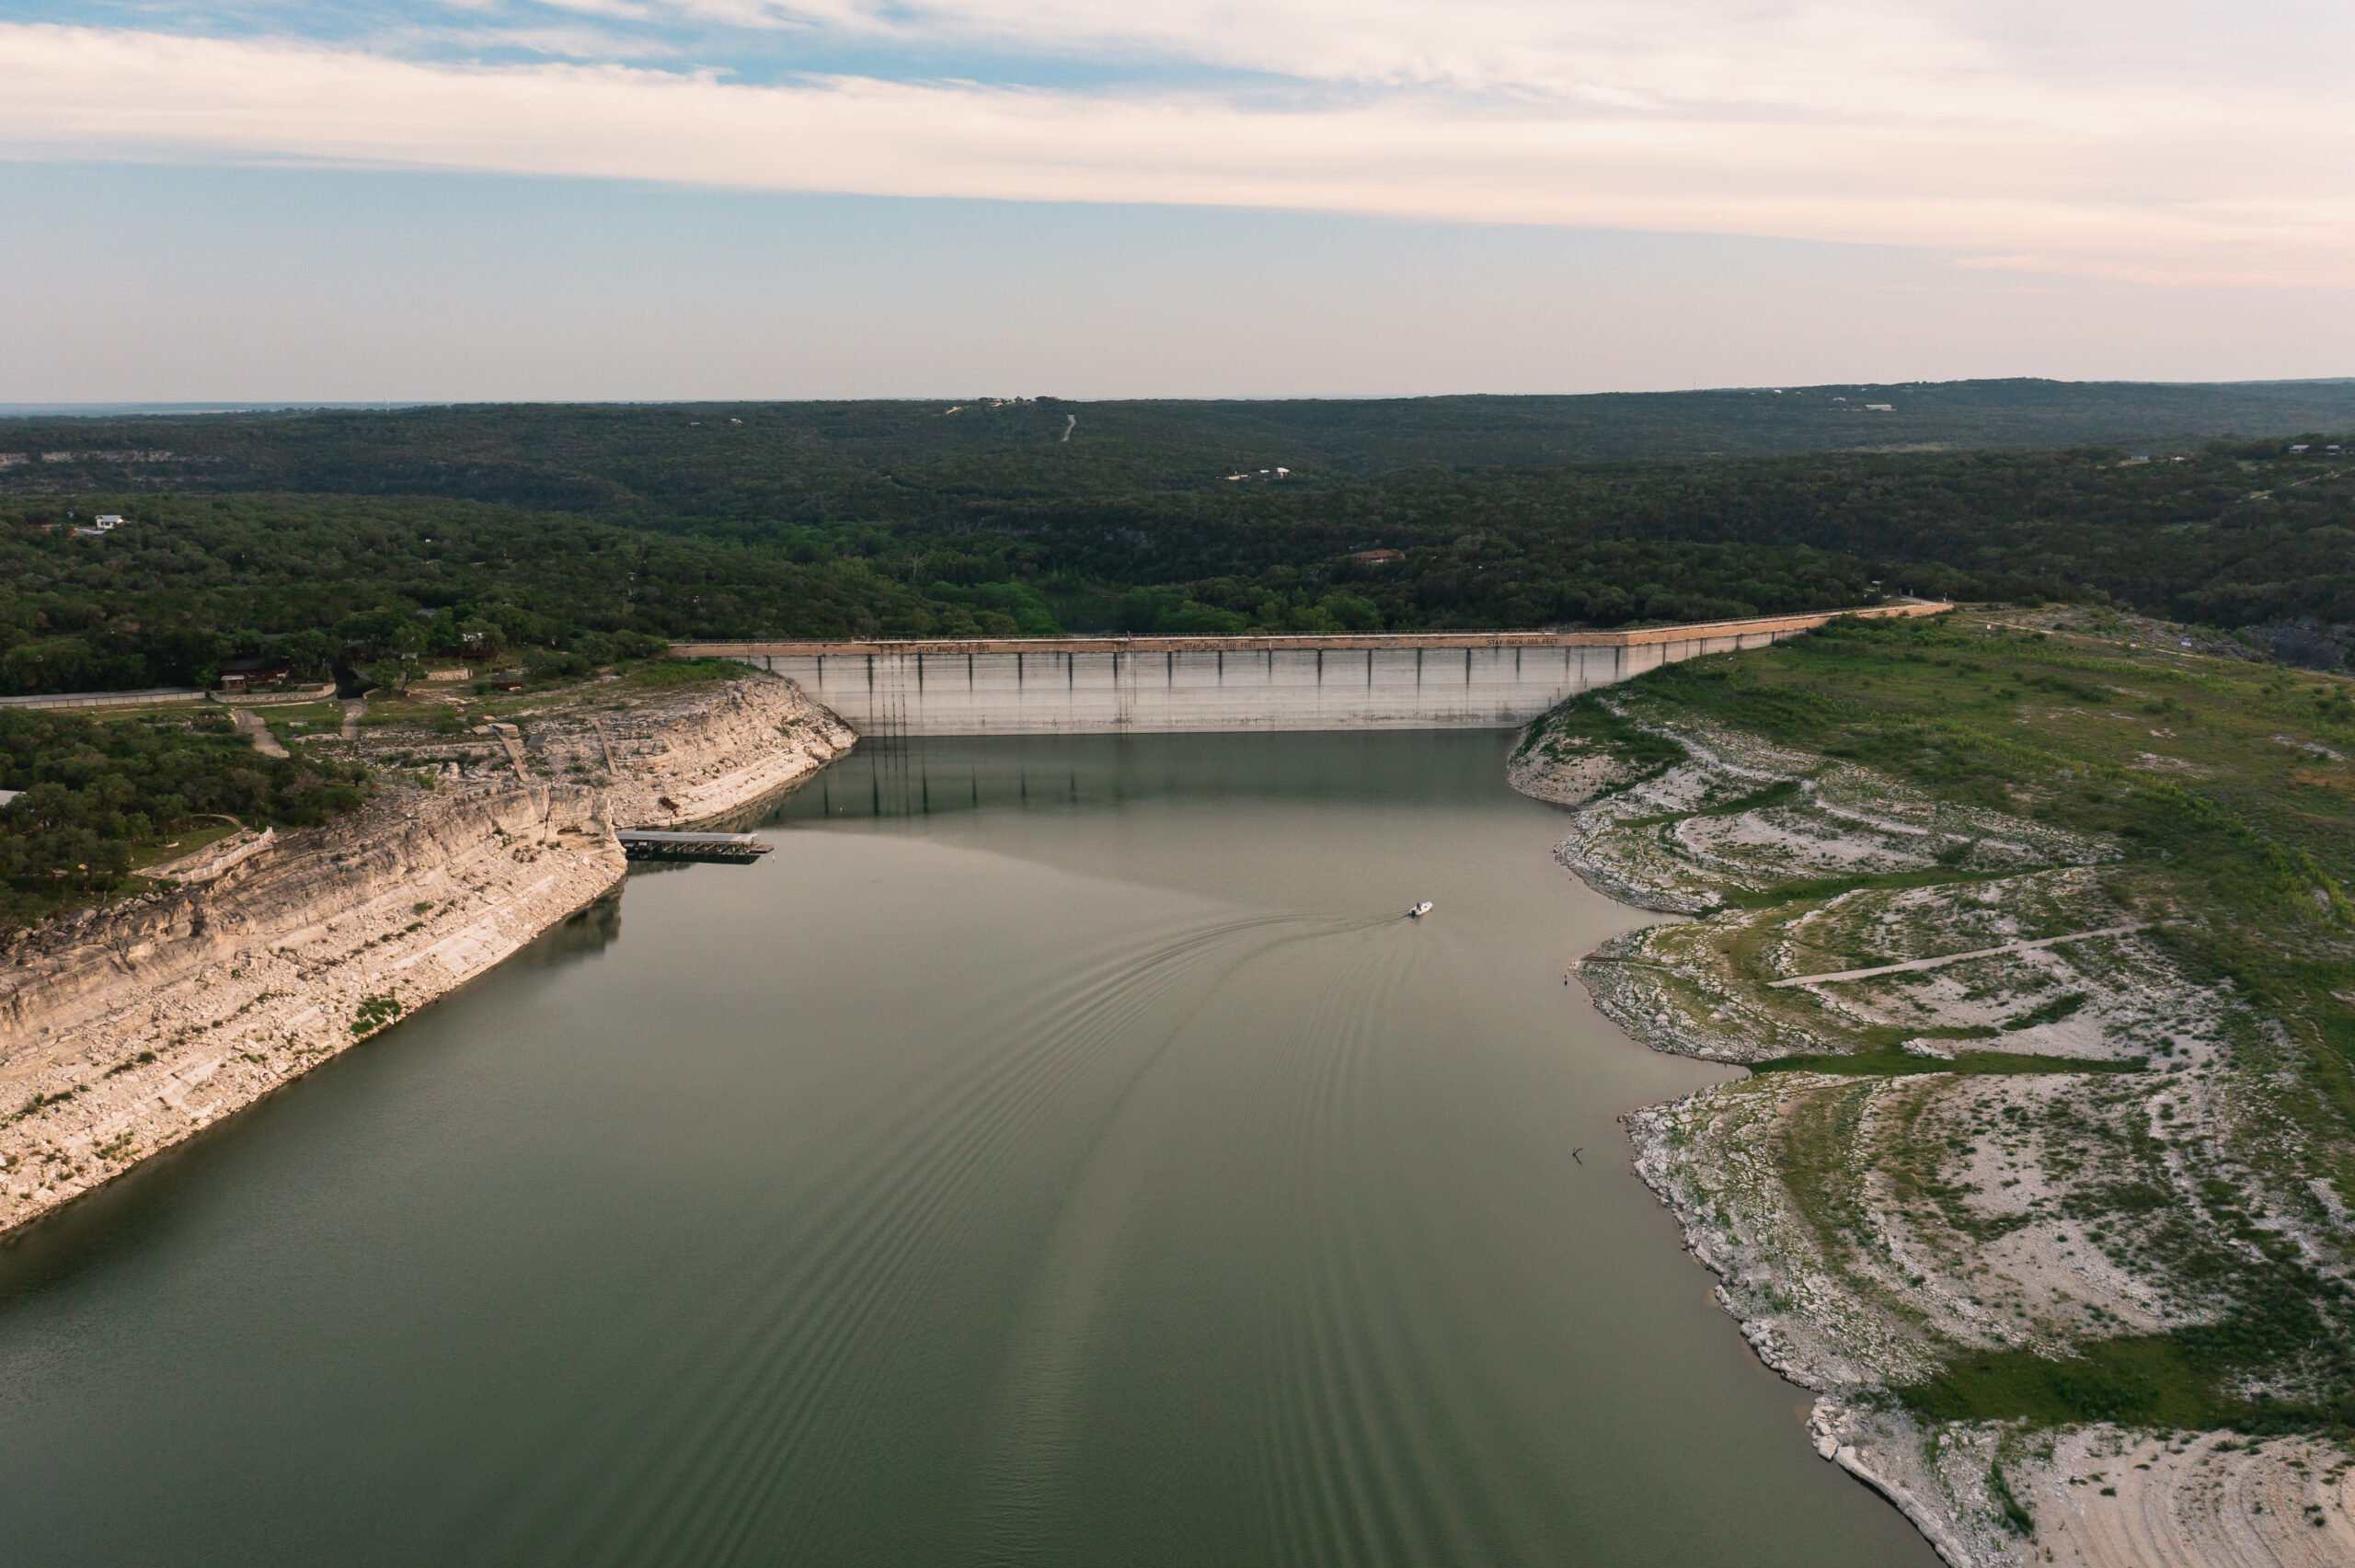 Lines on the Medina Lake dam, as well as on the surrounding shores, show how low the lake is—in May, nearly 83 feet below the conservation pool level.